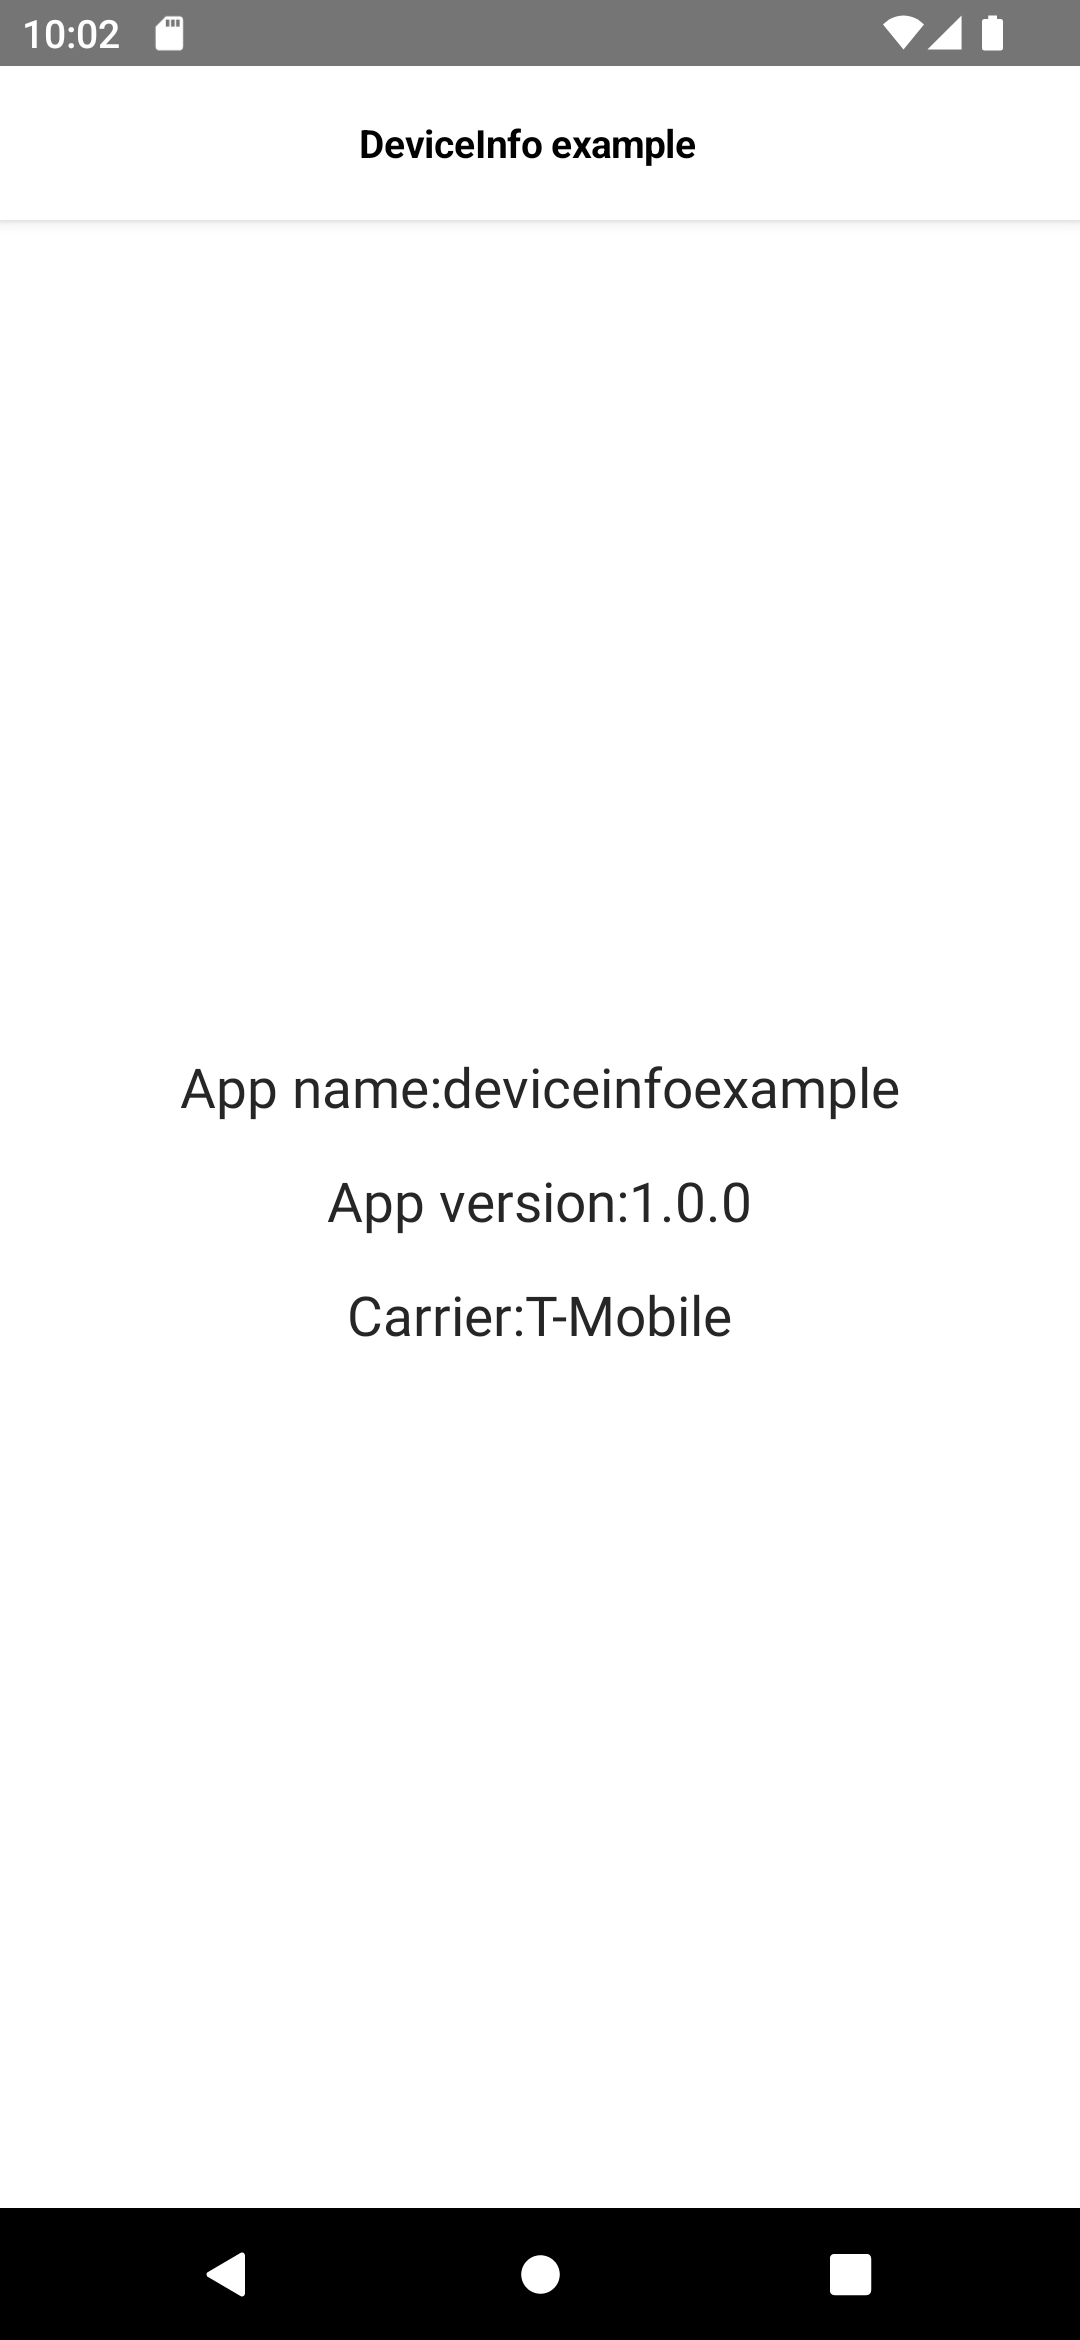 Deviceinfo example android